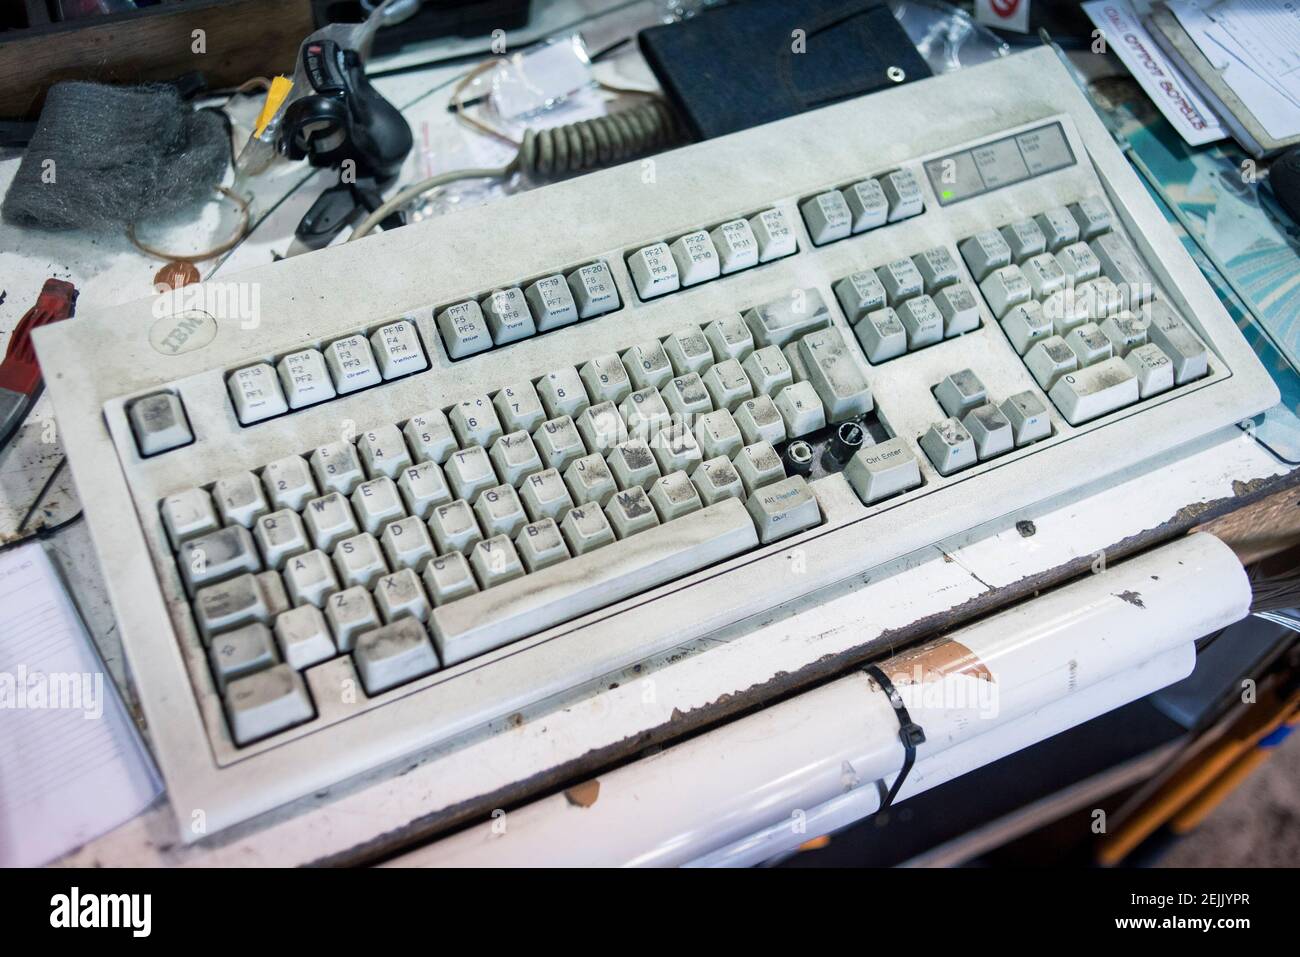 A dirty and well used computer keyboard in a cycle workshop Stock Photo